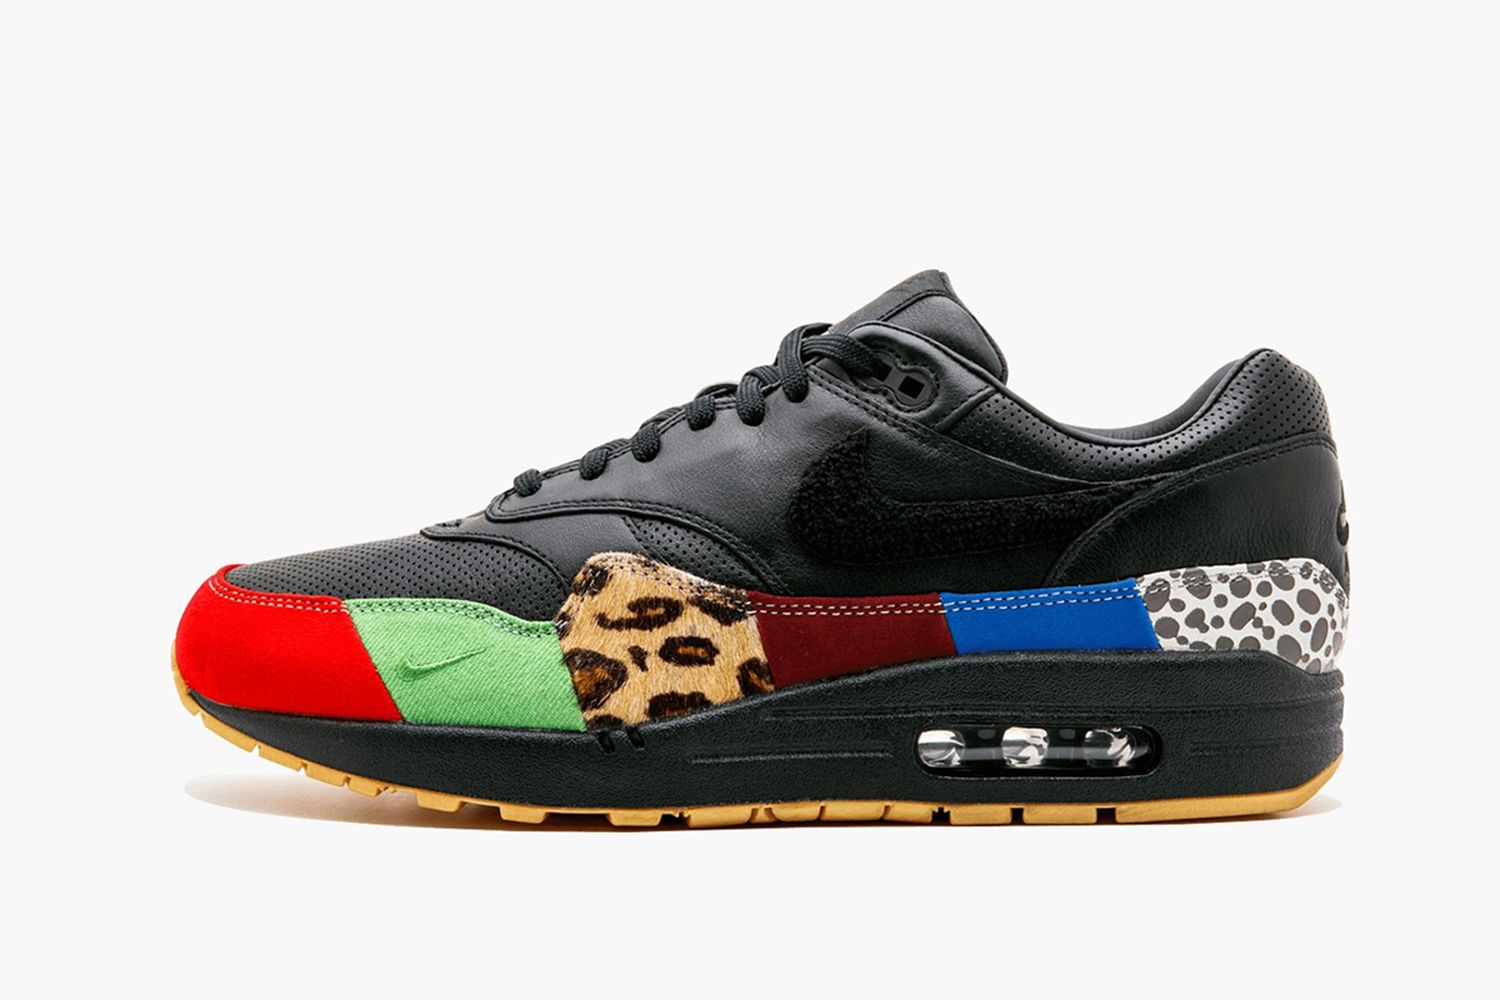 Shop goat air max day All the Best Air Max Day Releases in One Place